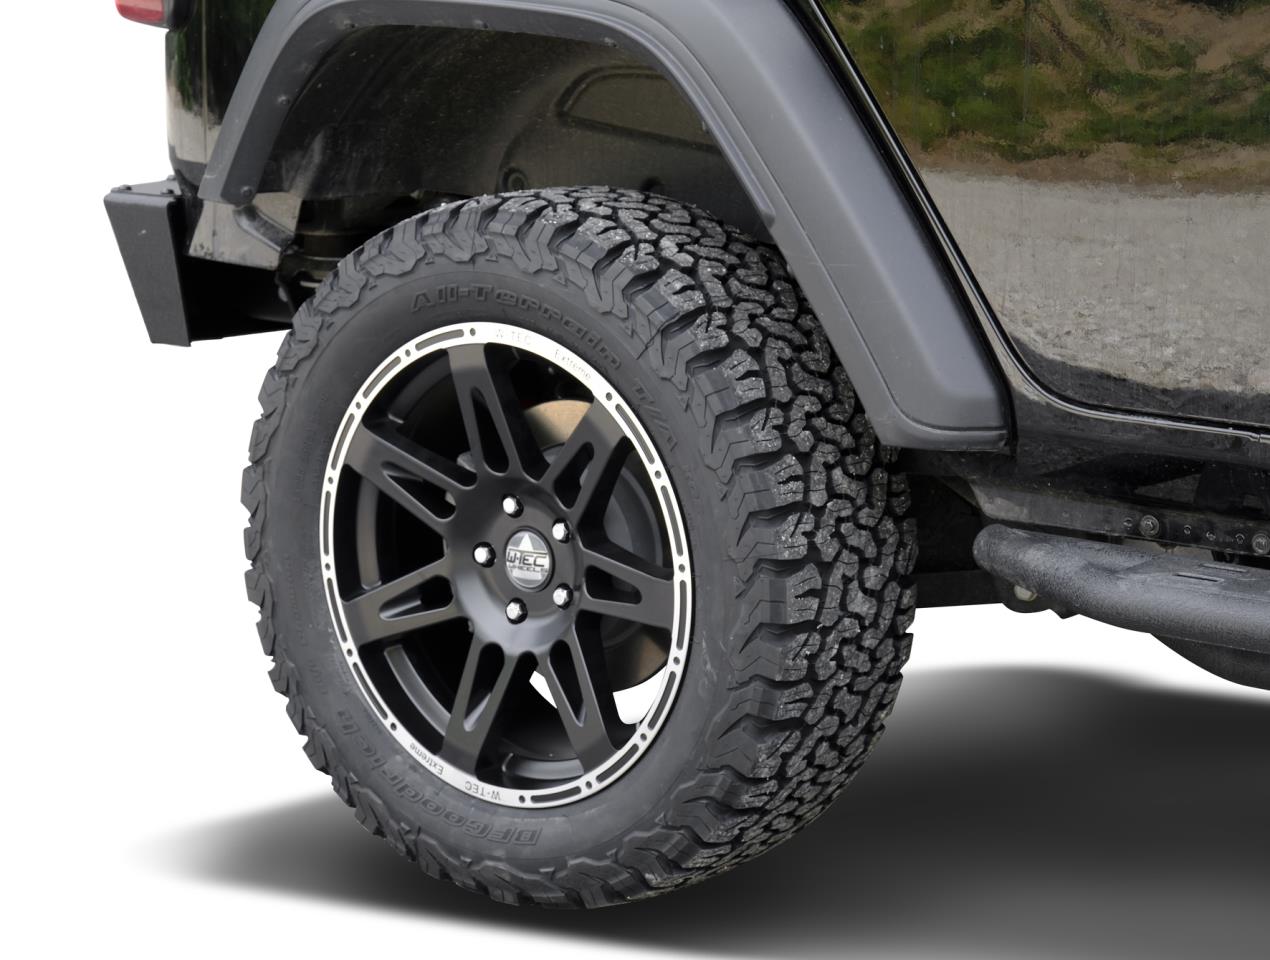 Complete wheels W-TEC Extreme 8,5x20 with 275/55R20 BF Goodrich All Terrain fits Jeep Wrangler JL (2018-)